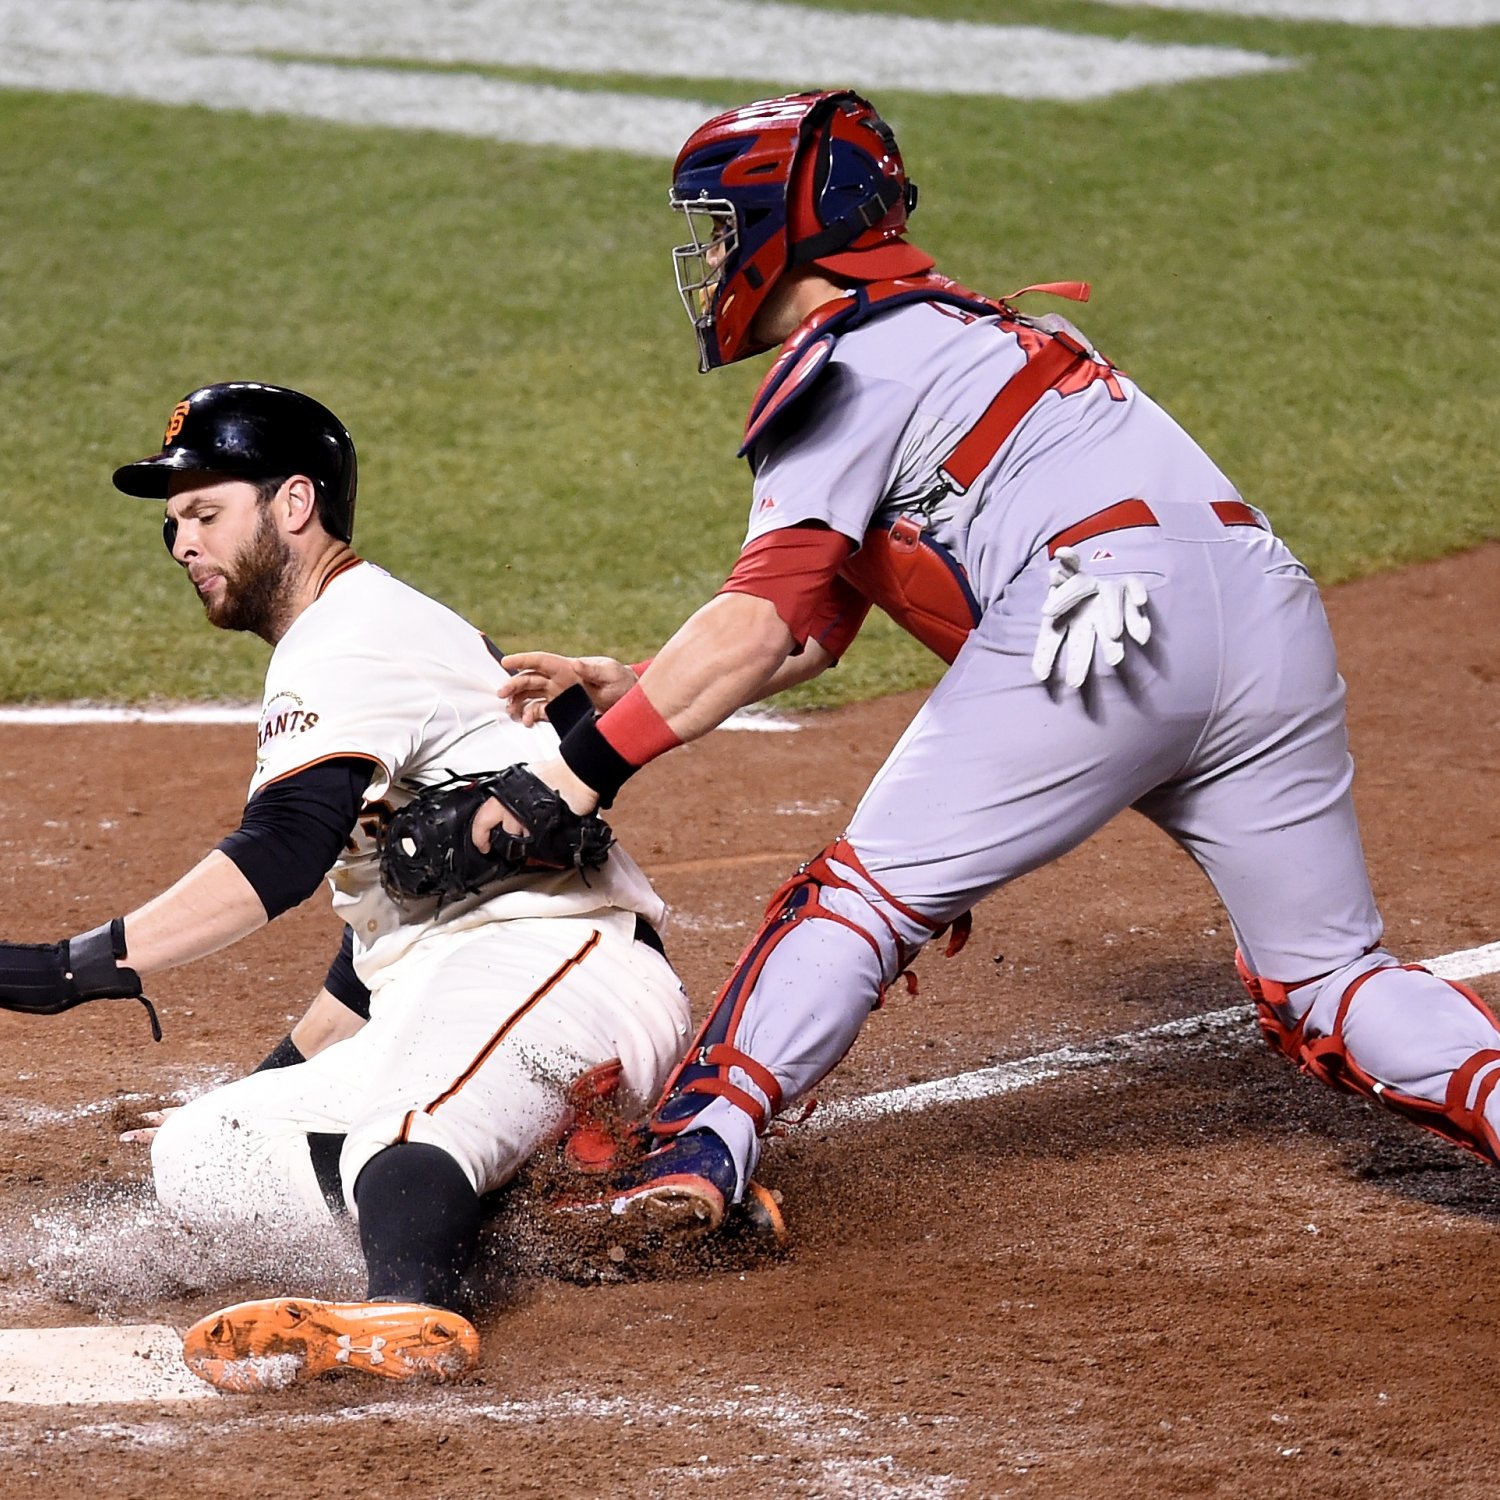 St. Louis Cardinals vs. SF Giants Game 5: Live Score and NLCS Highlights | Bleacher Report